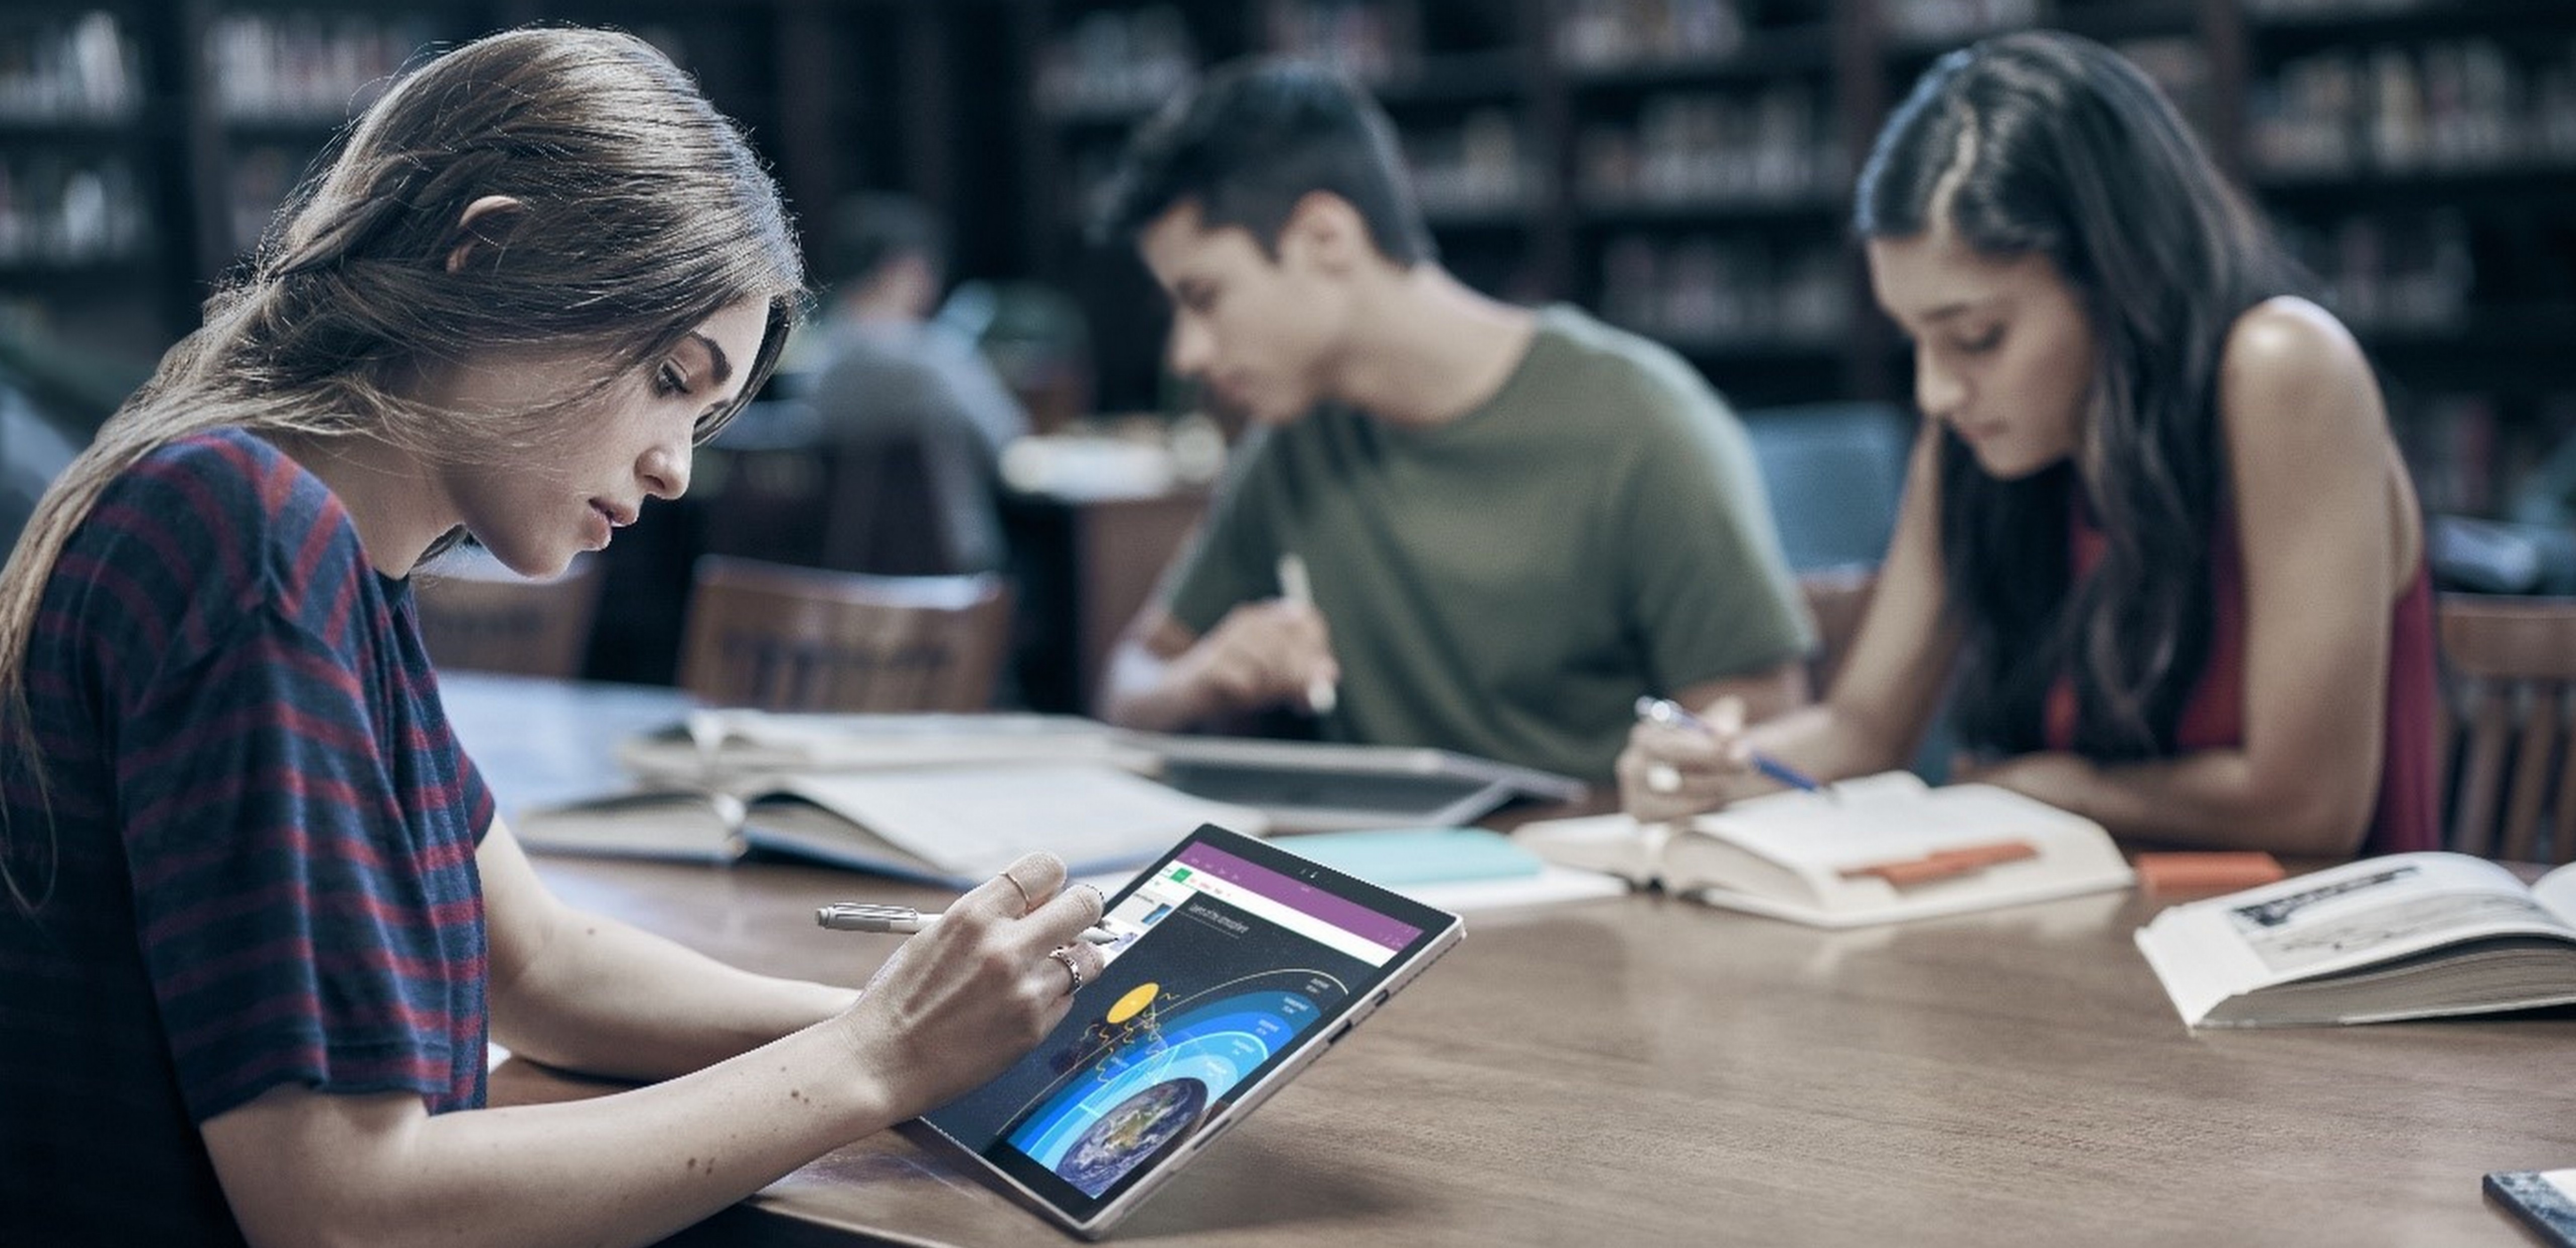 Microsoft Surface launches a warranty primed for schools and education